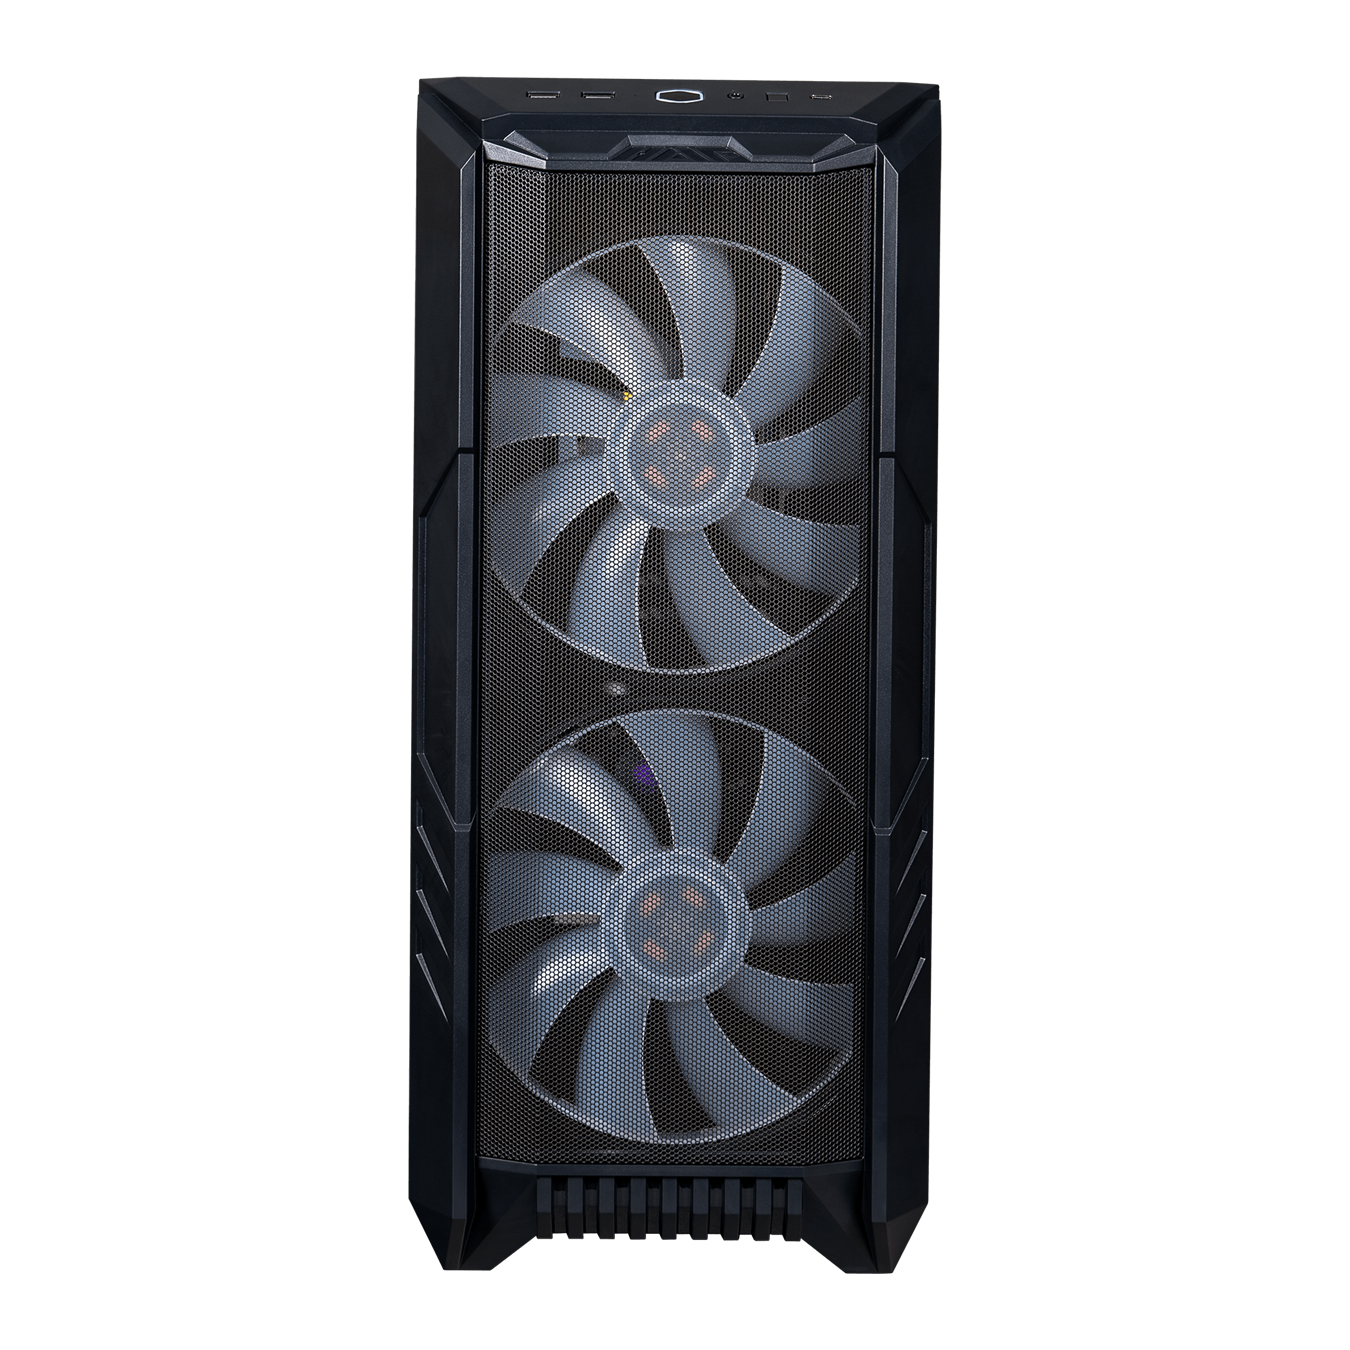 Front view of the black HAF 500 with mesh front panel and two 200mm MasterFans.